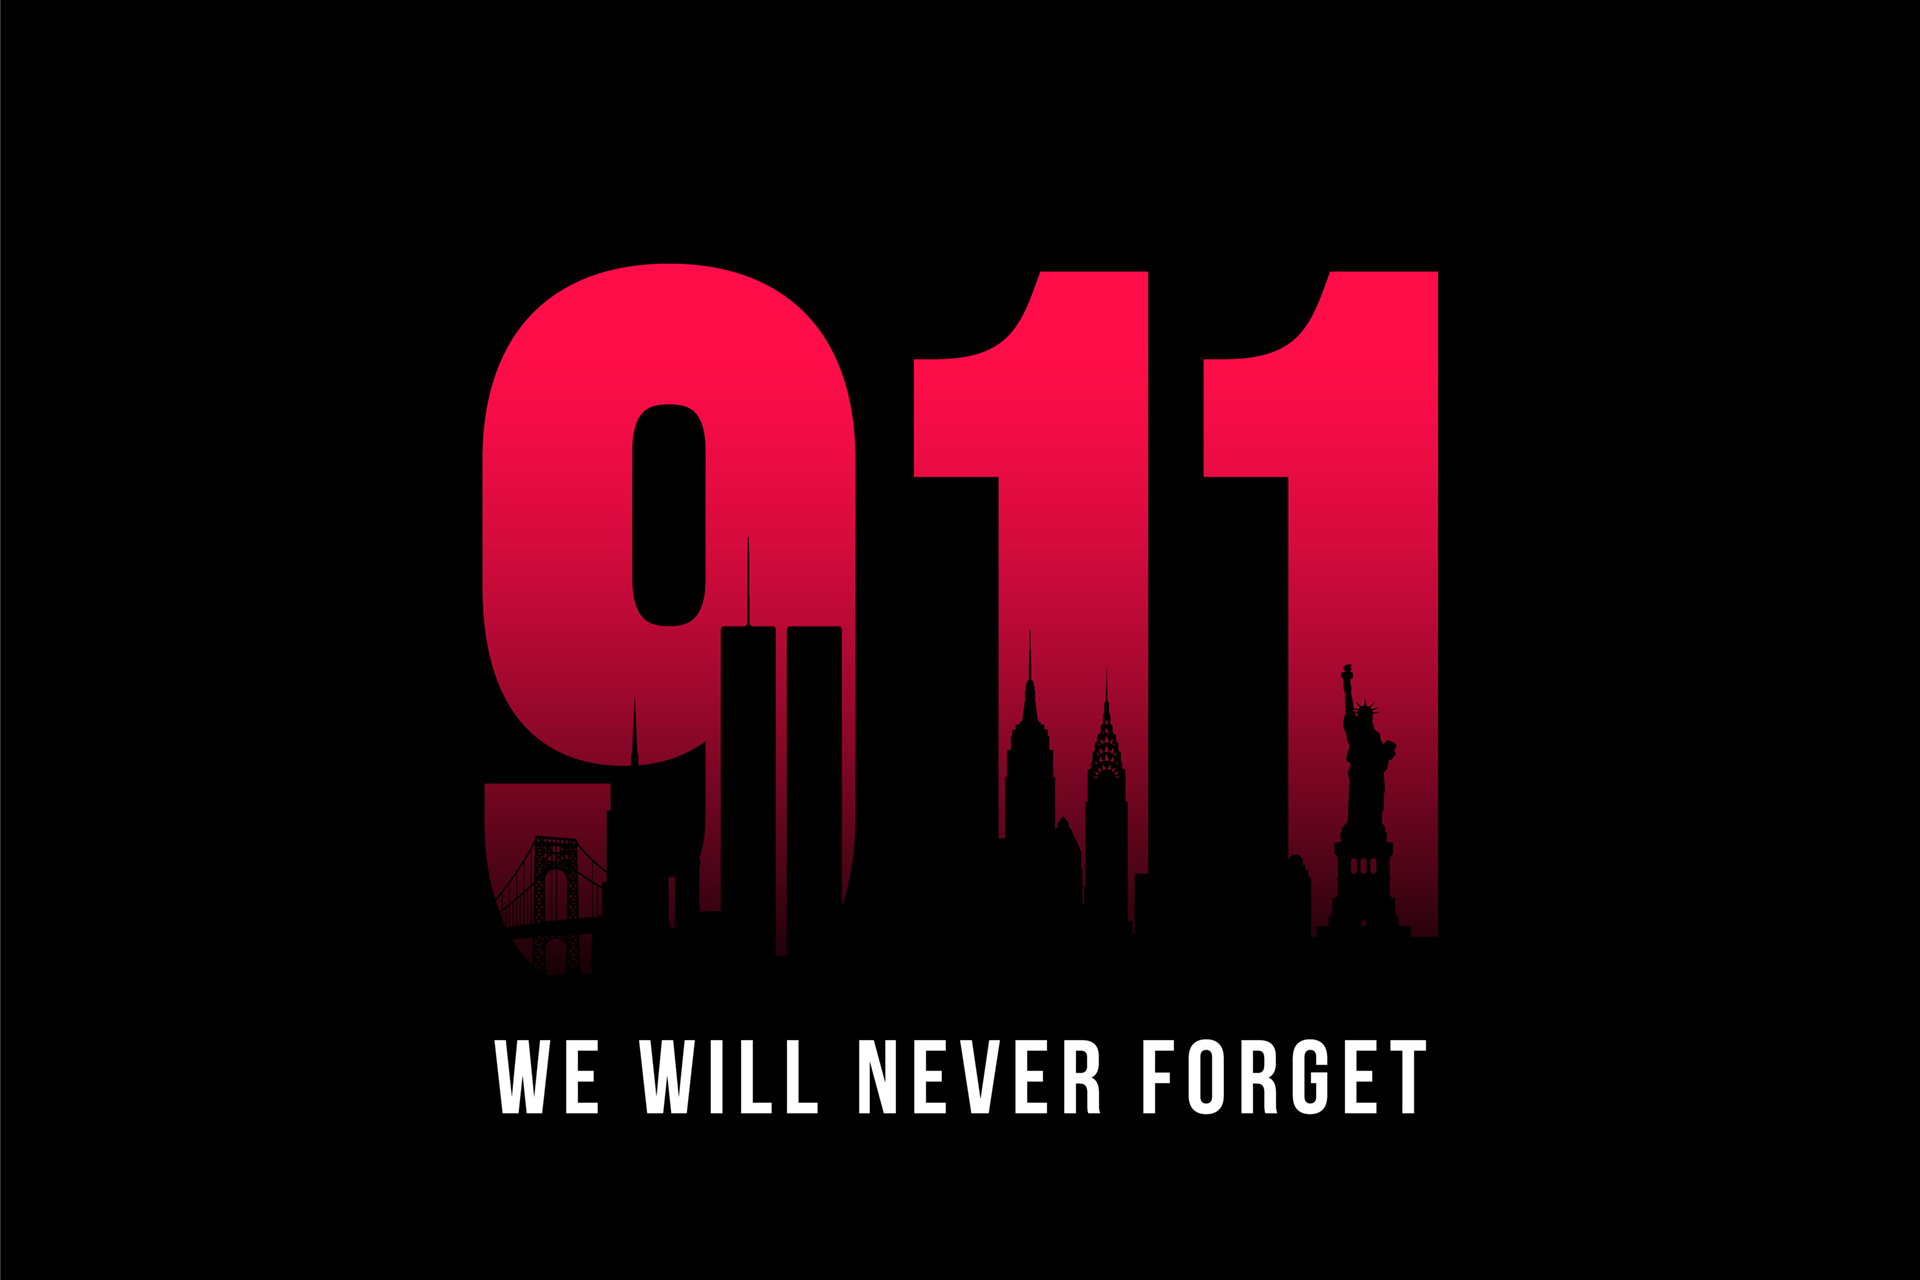 September 11 We Will Never Forget